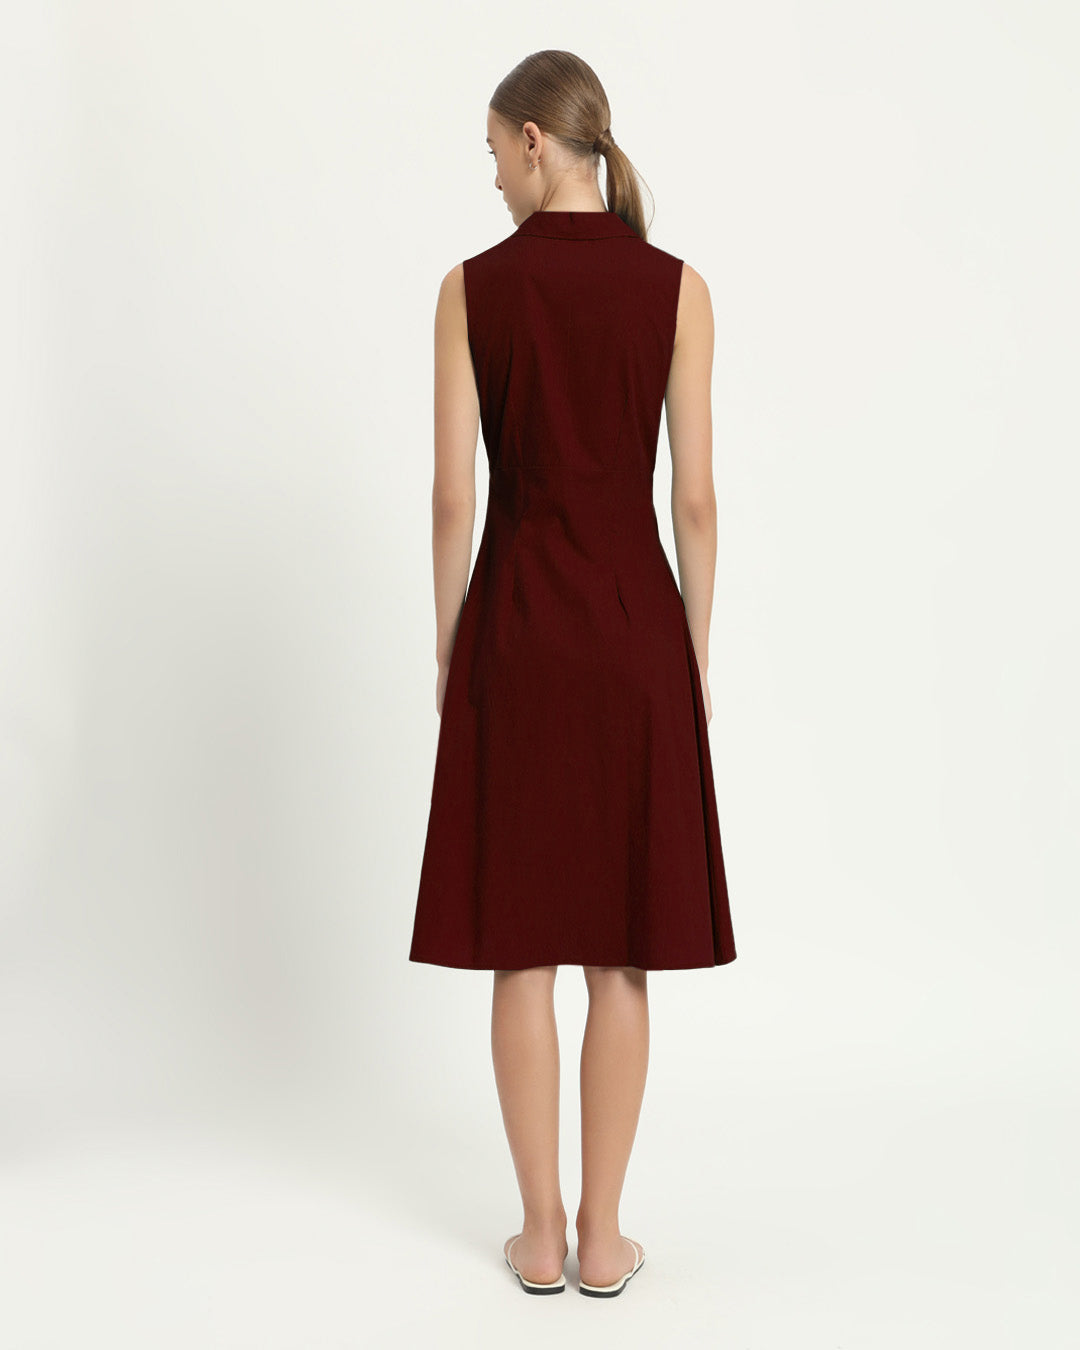 The Germering Rouge Cotton Dress